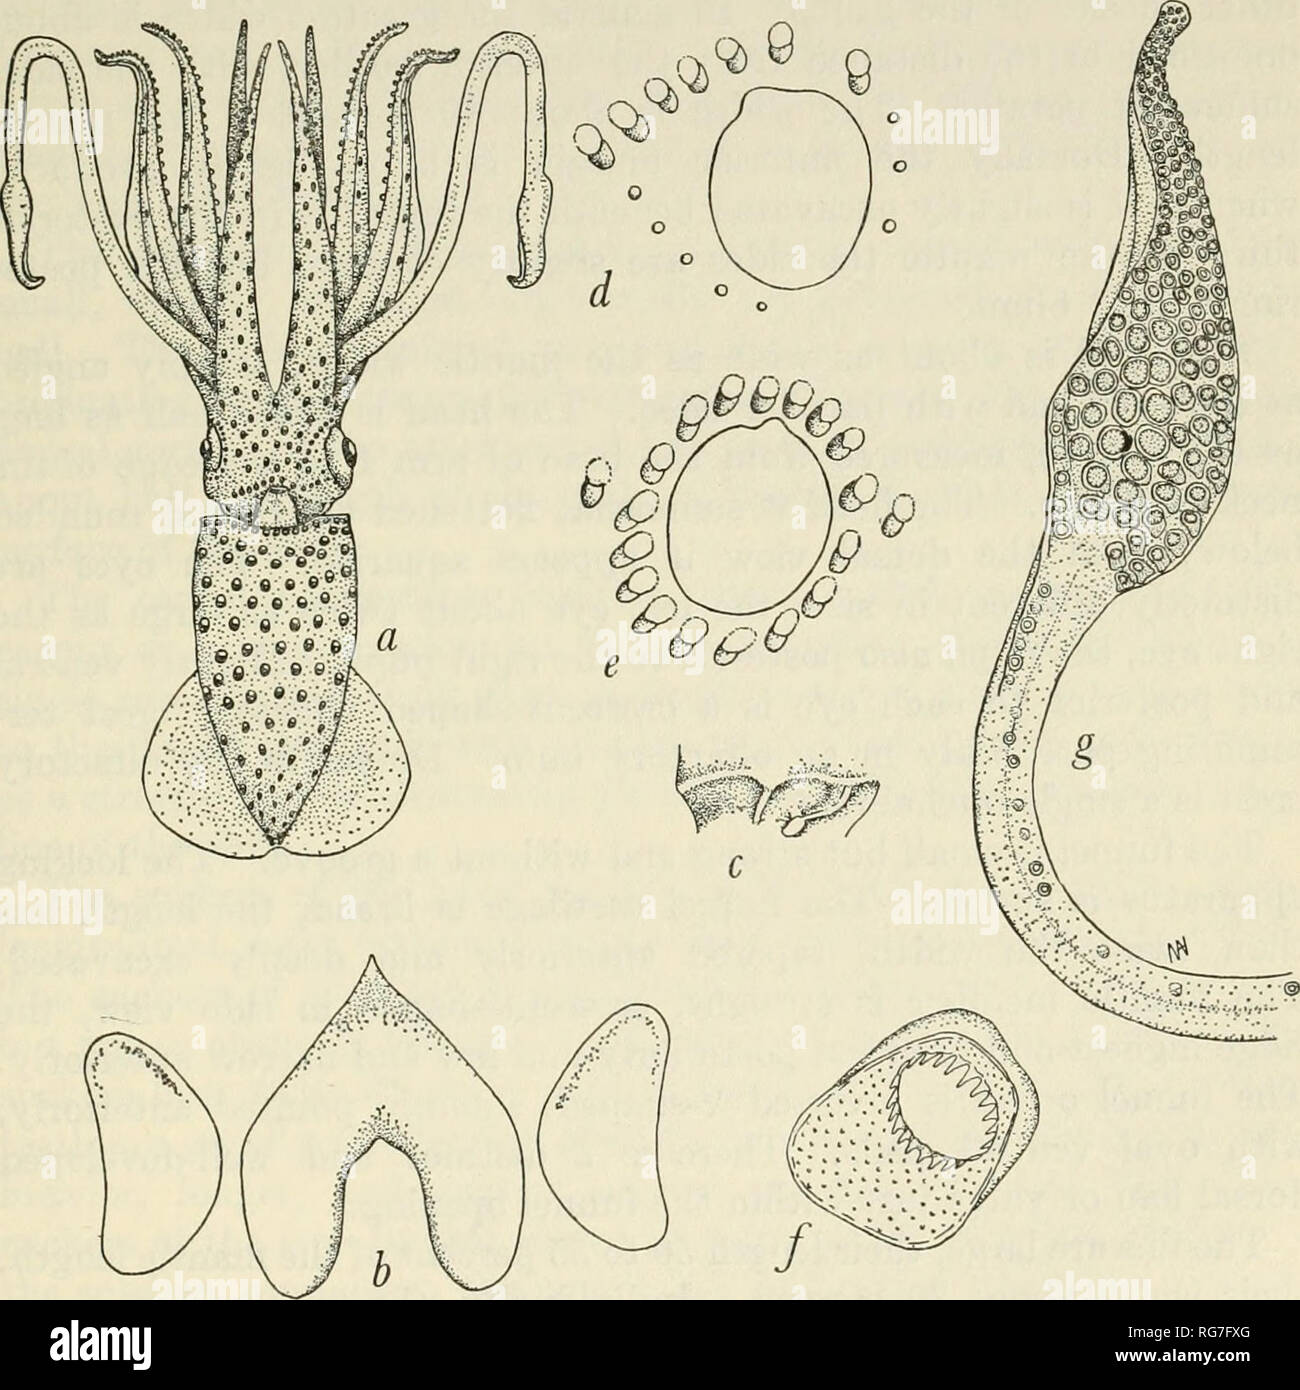 . Bulletin - United States National Museum. Science. CEPHALOPODS OF THE PHILIPPINE ISLANDS 119 south as Cape Horn. Sasaki represented it from Japan and Castro de Elera recorded it from Luzon and Cebu, Philippines. Celebes! Family Histioteuthidae Calliteuthis celetaria pacifica Voss, 1962 Figure 26 Calliteuthis celetaria pacifica Voss, 1962, p. 174. HoLOTYPE.—1 9, ML 74.0 mm., Sta. D5564, Dammi Id. between Jolo and Tawi Tawi, 432 m., 52.3° F, Sept. 21, 1909; USNM 575453. Paratypes.—2 99, ML 52.0-33.0 mm., Sta. D5589, Mabul Id., Borneo, 494 m., 45.7° F, Sept. 29, 1901; USNM 575457. 1 9, ML. Figu Stock Photo